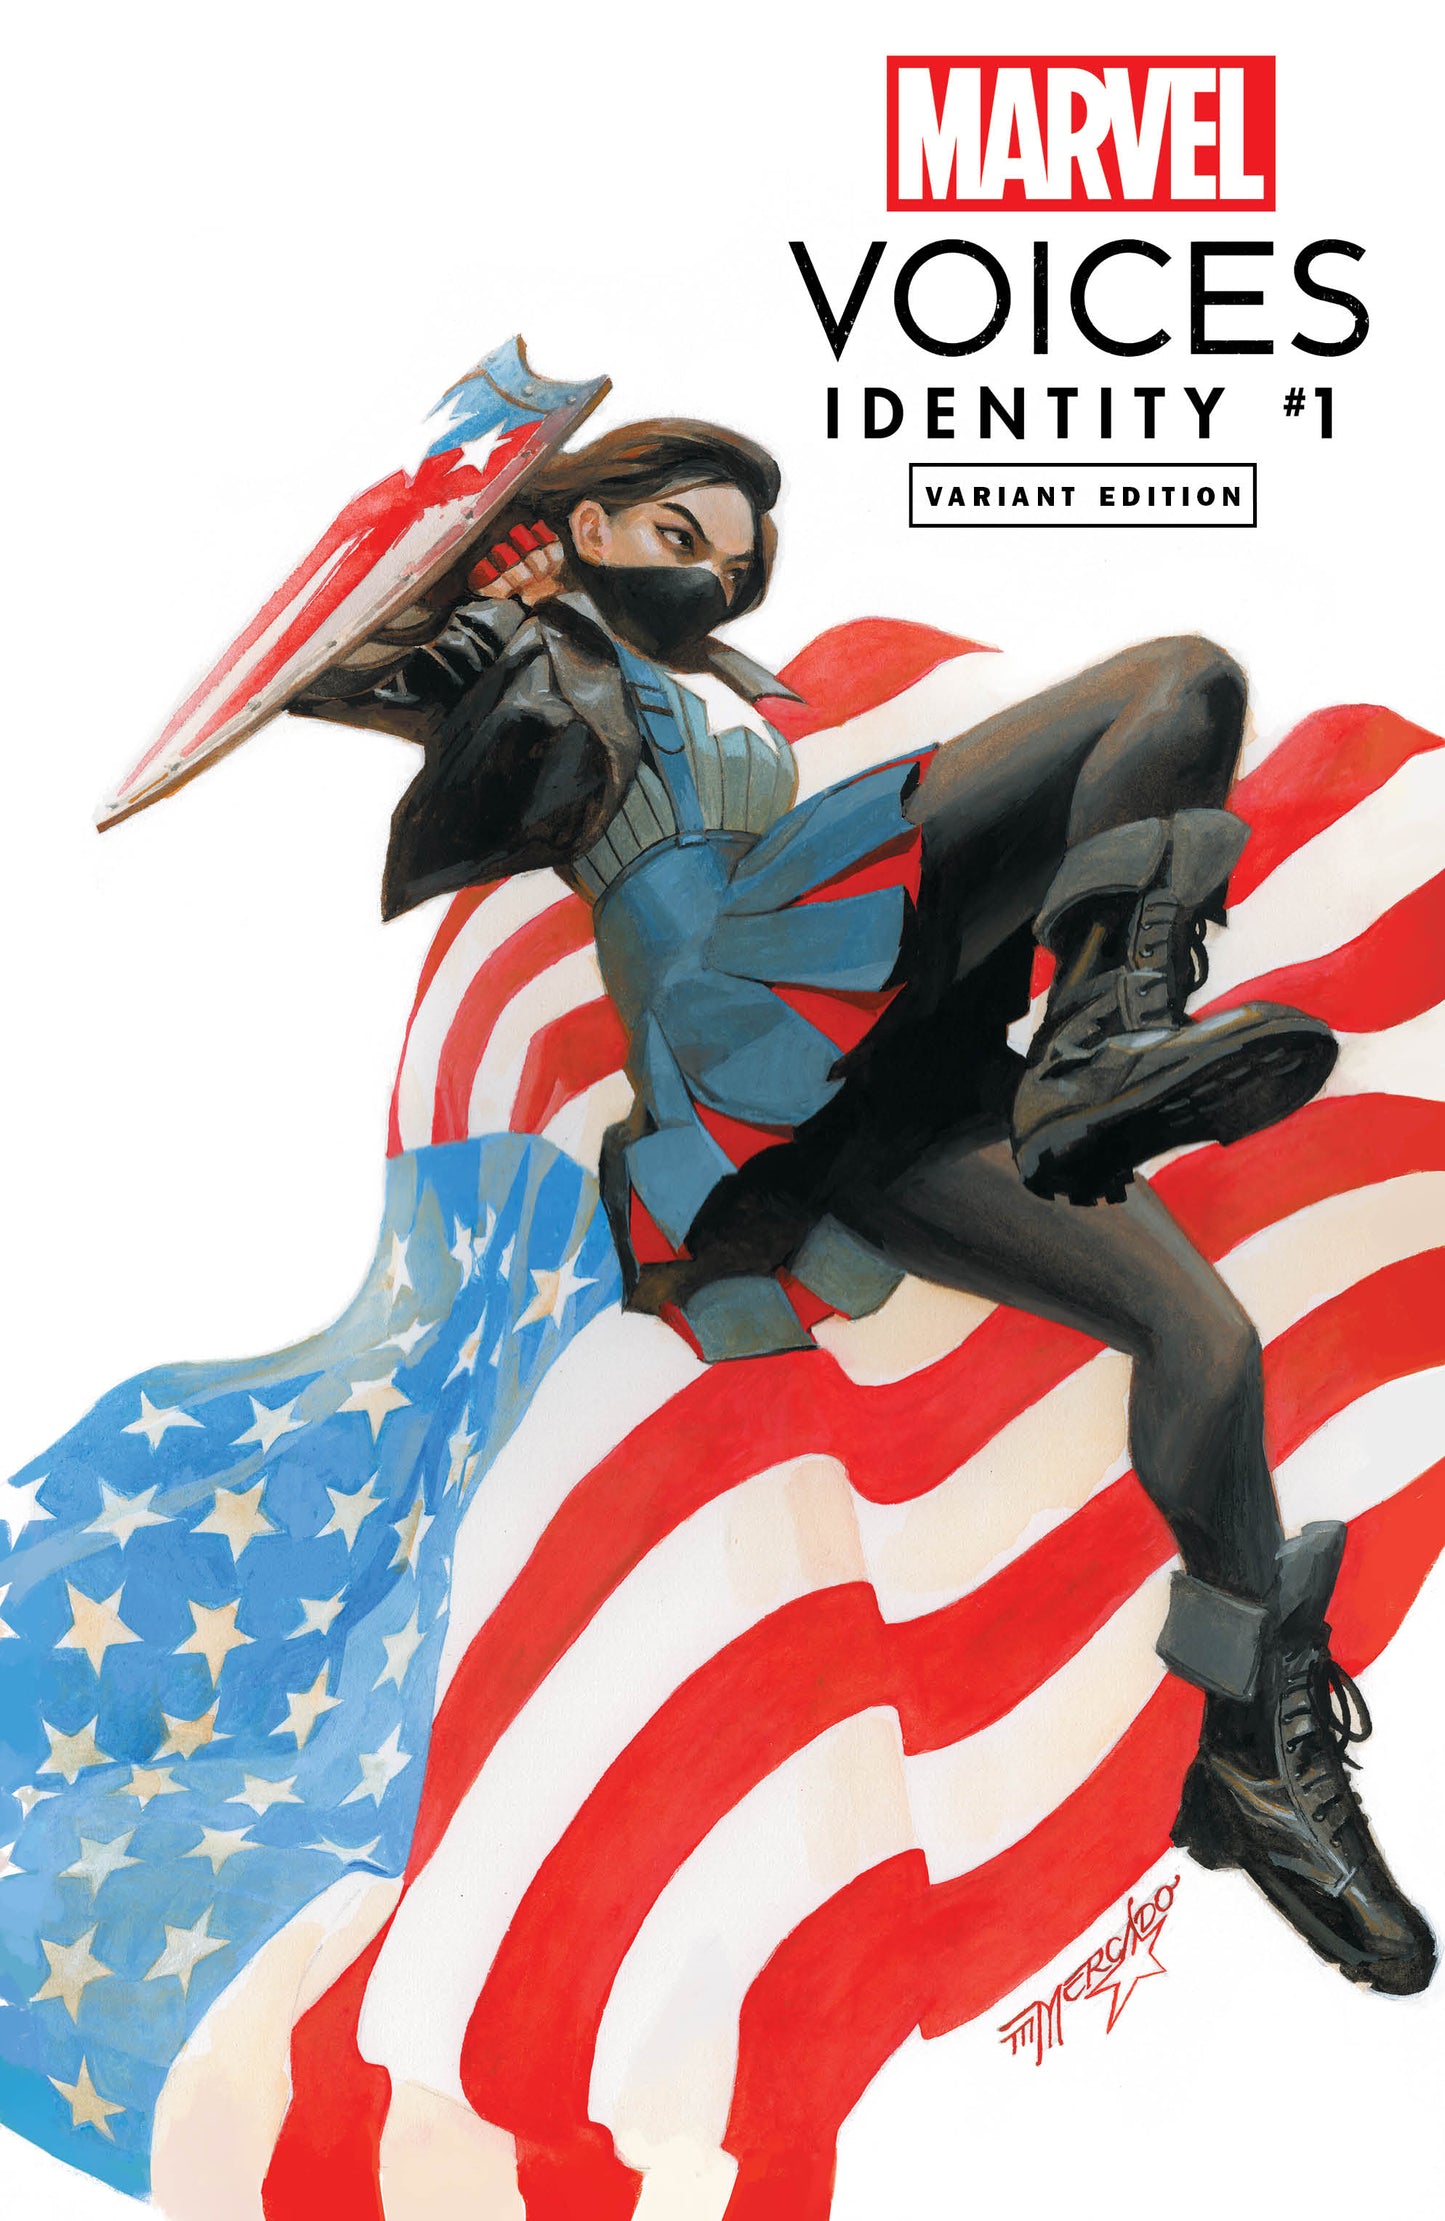 FREE MARVELS VOICES IDENTITY #1 SSCO & CO MIGUEL MERCADO ARIELLE AGBAYANI CAPTAIN AMERICA VARIANT 2021 with $30 PURCHASE (CODE: AAPI)